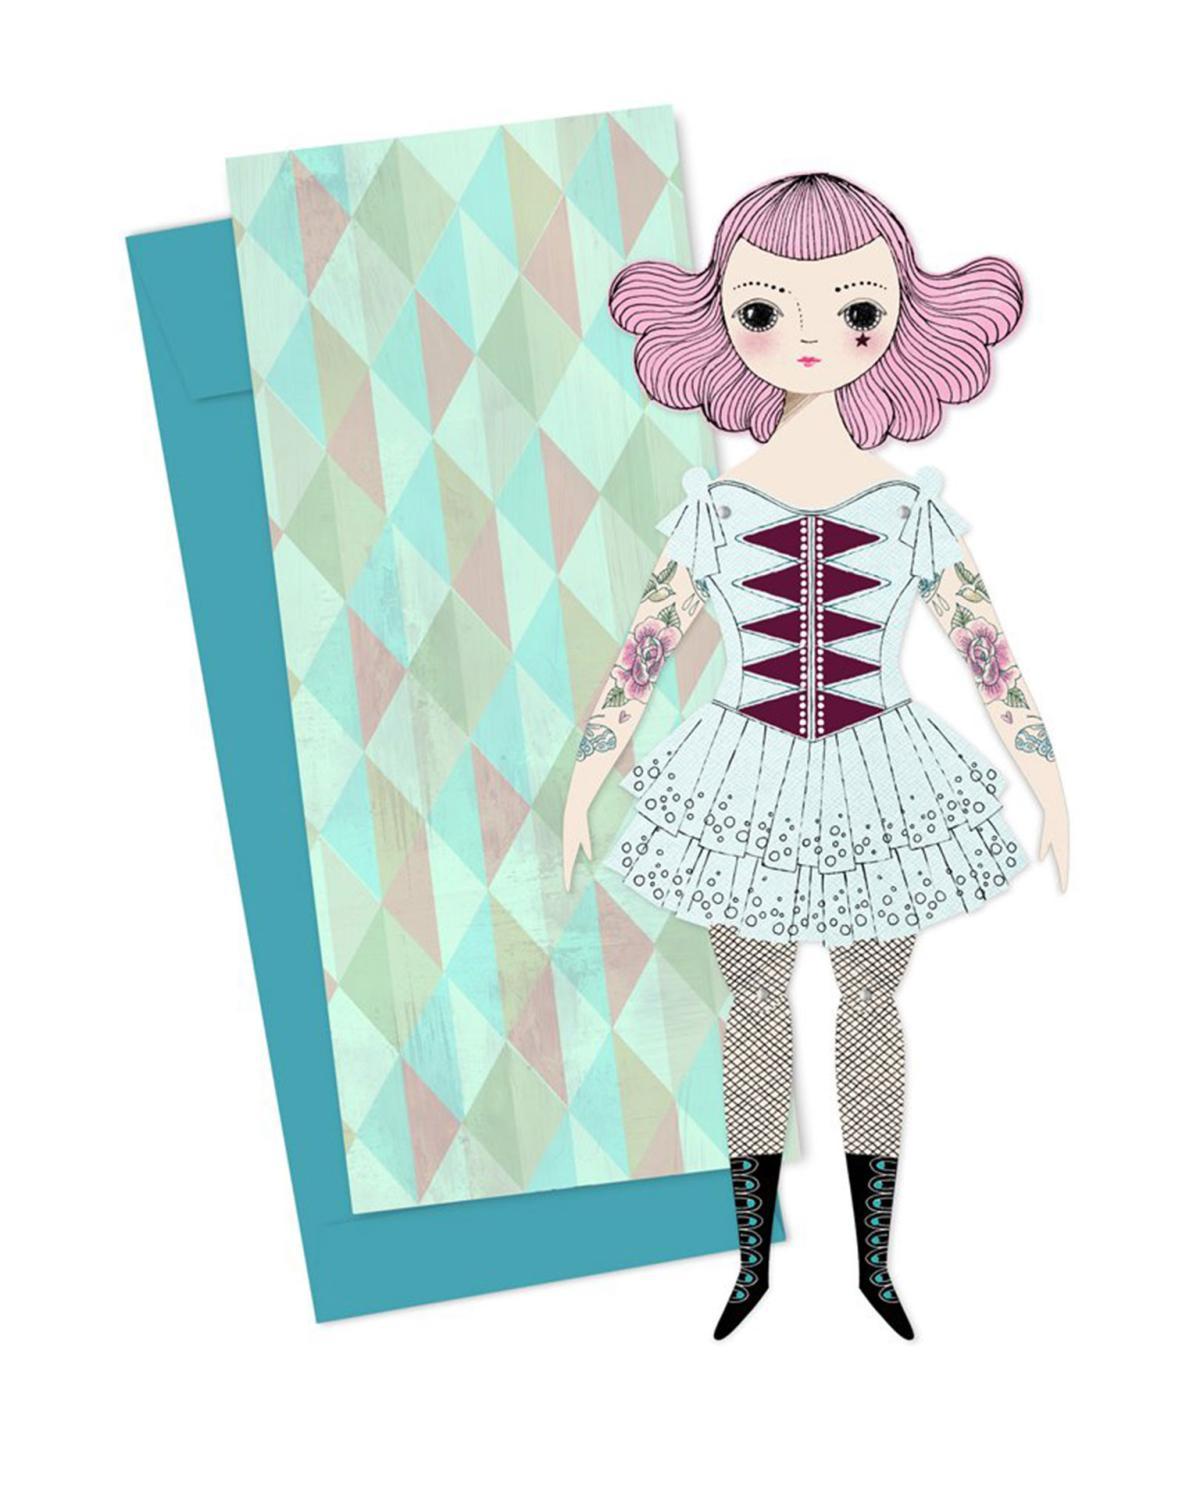 Little of unusual kind play amelia mailable paper doll